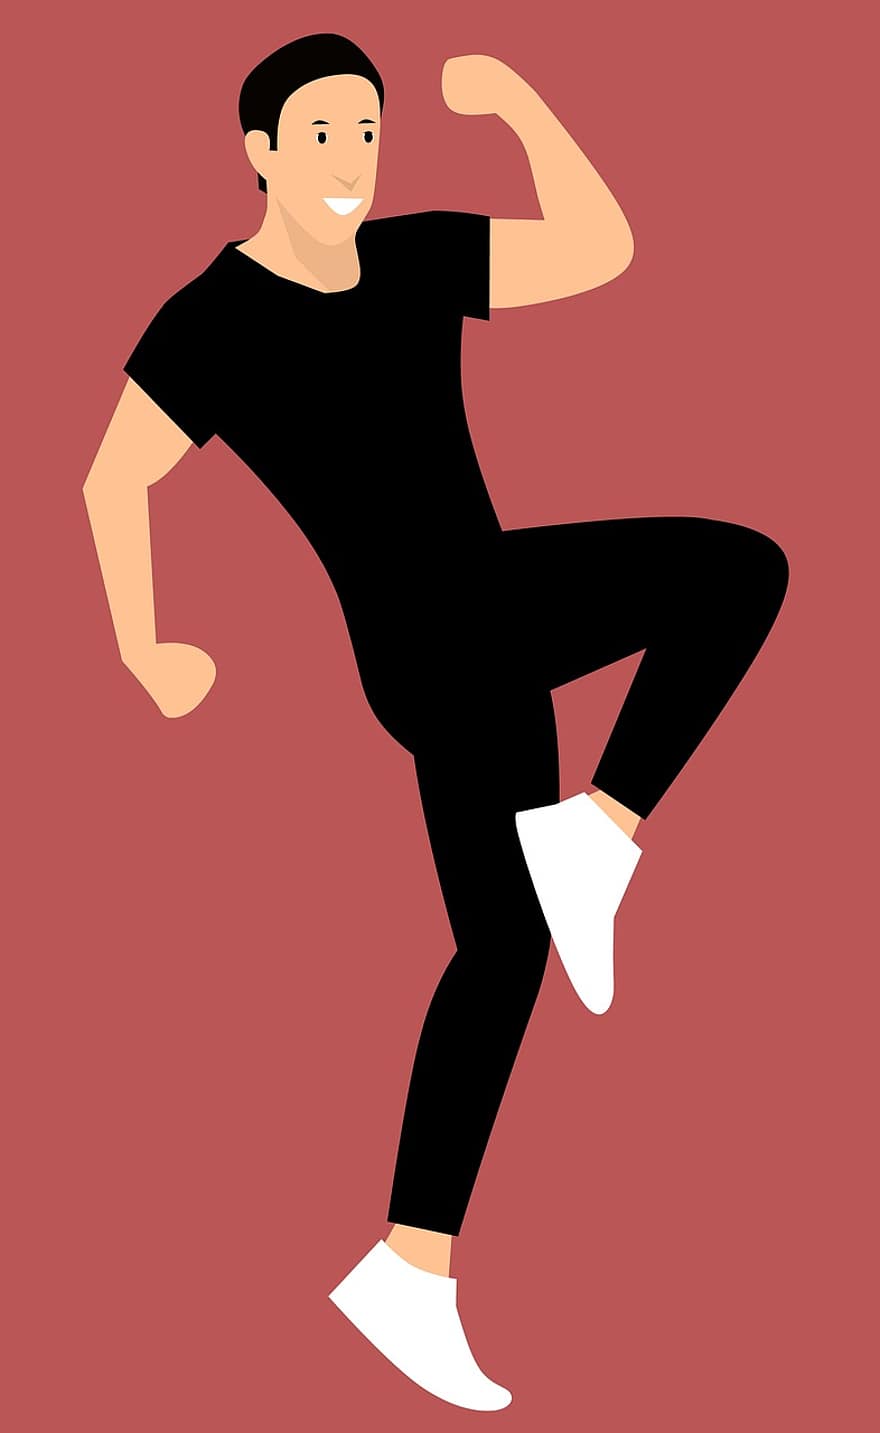 Happy, Young, Man, Cartoon Character, Idea, Black T-shirt, Posing, I Did It, Yes, Exited, Exiting